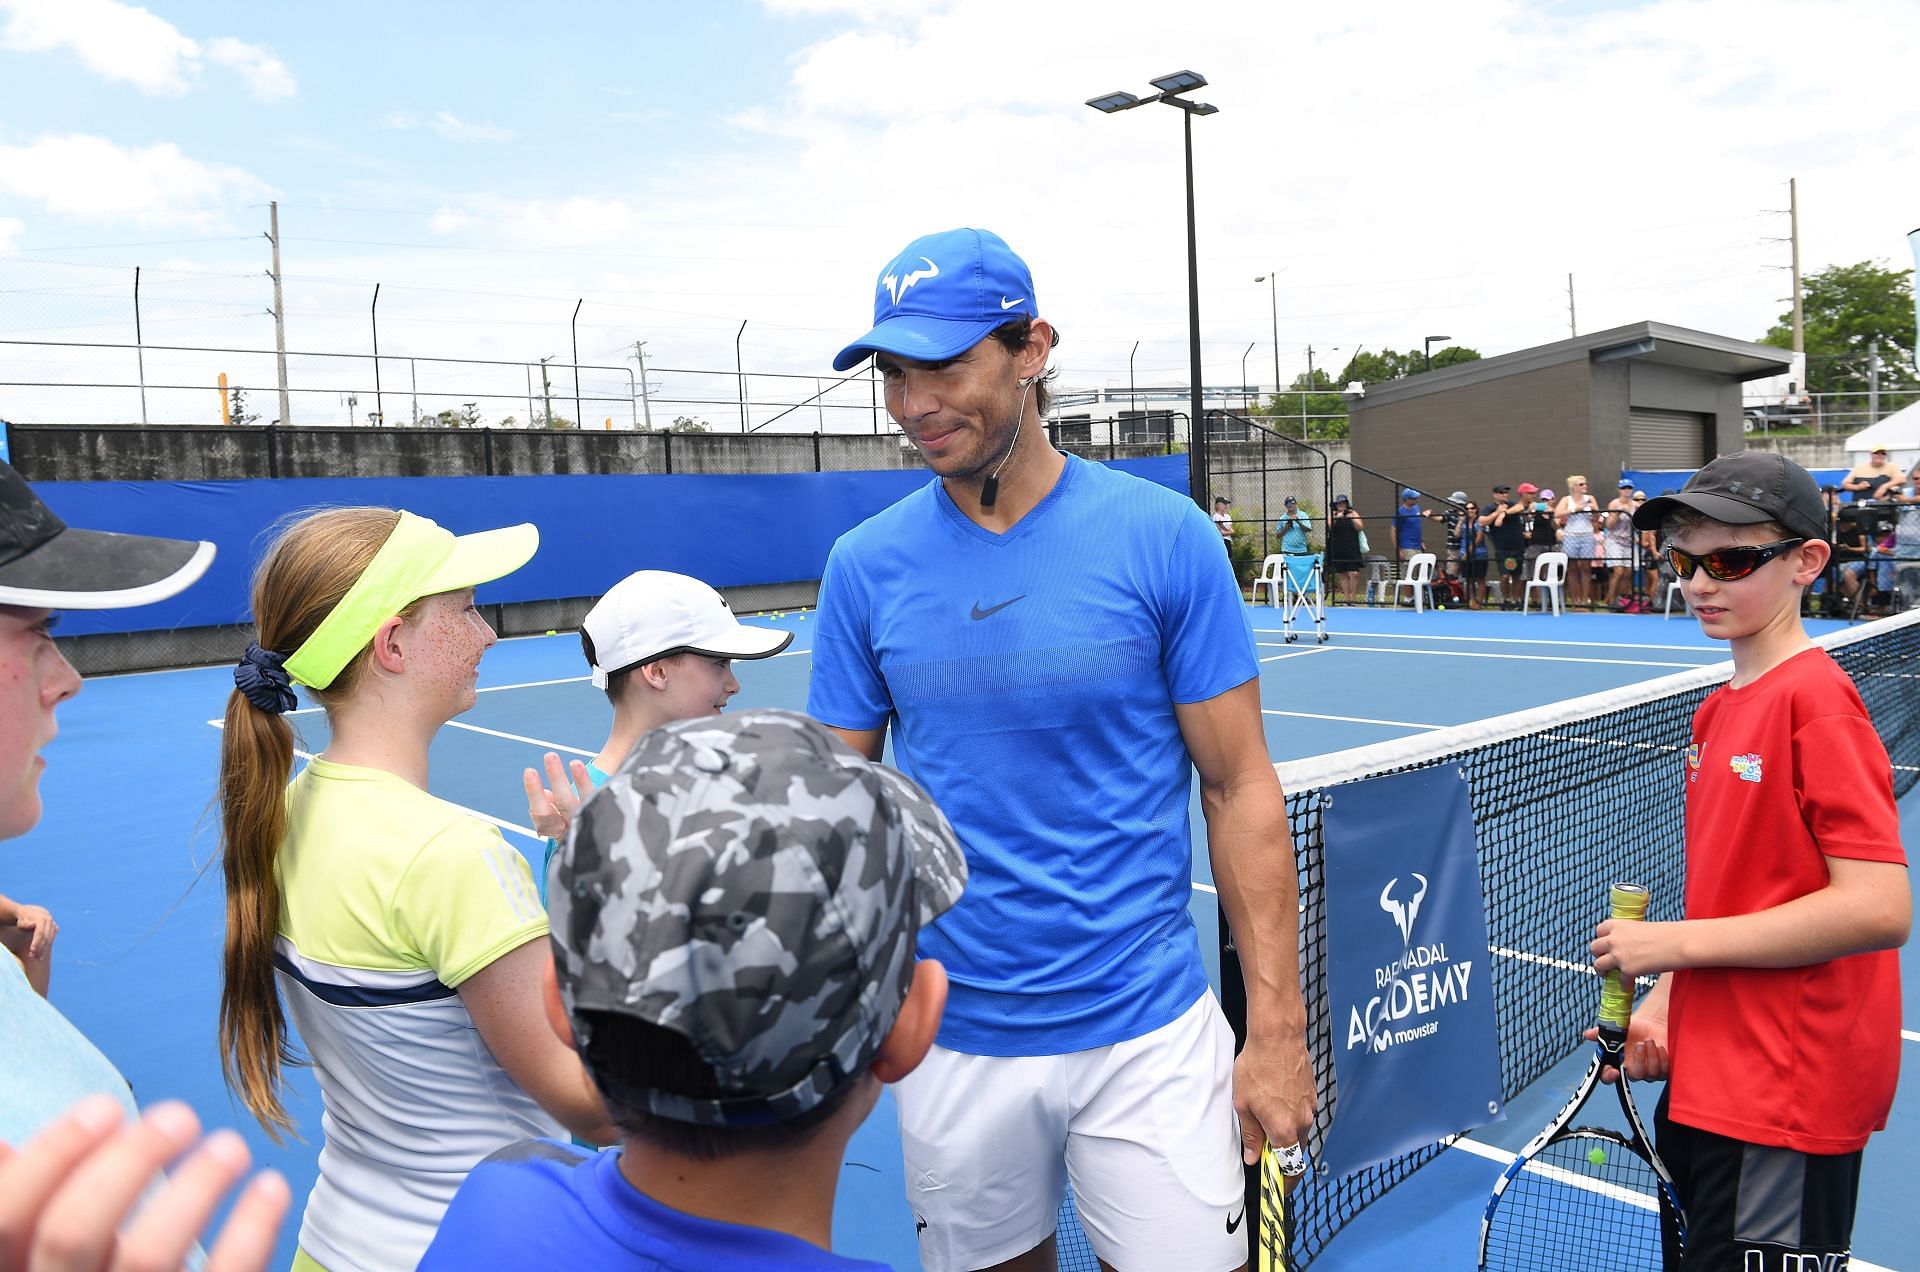 Rafael Nadal interacting with youngsters selected for the Academy in Brisbane, 2019